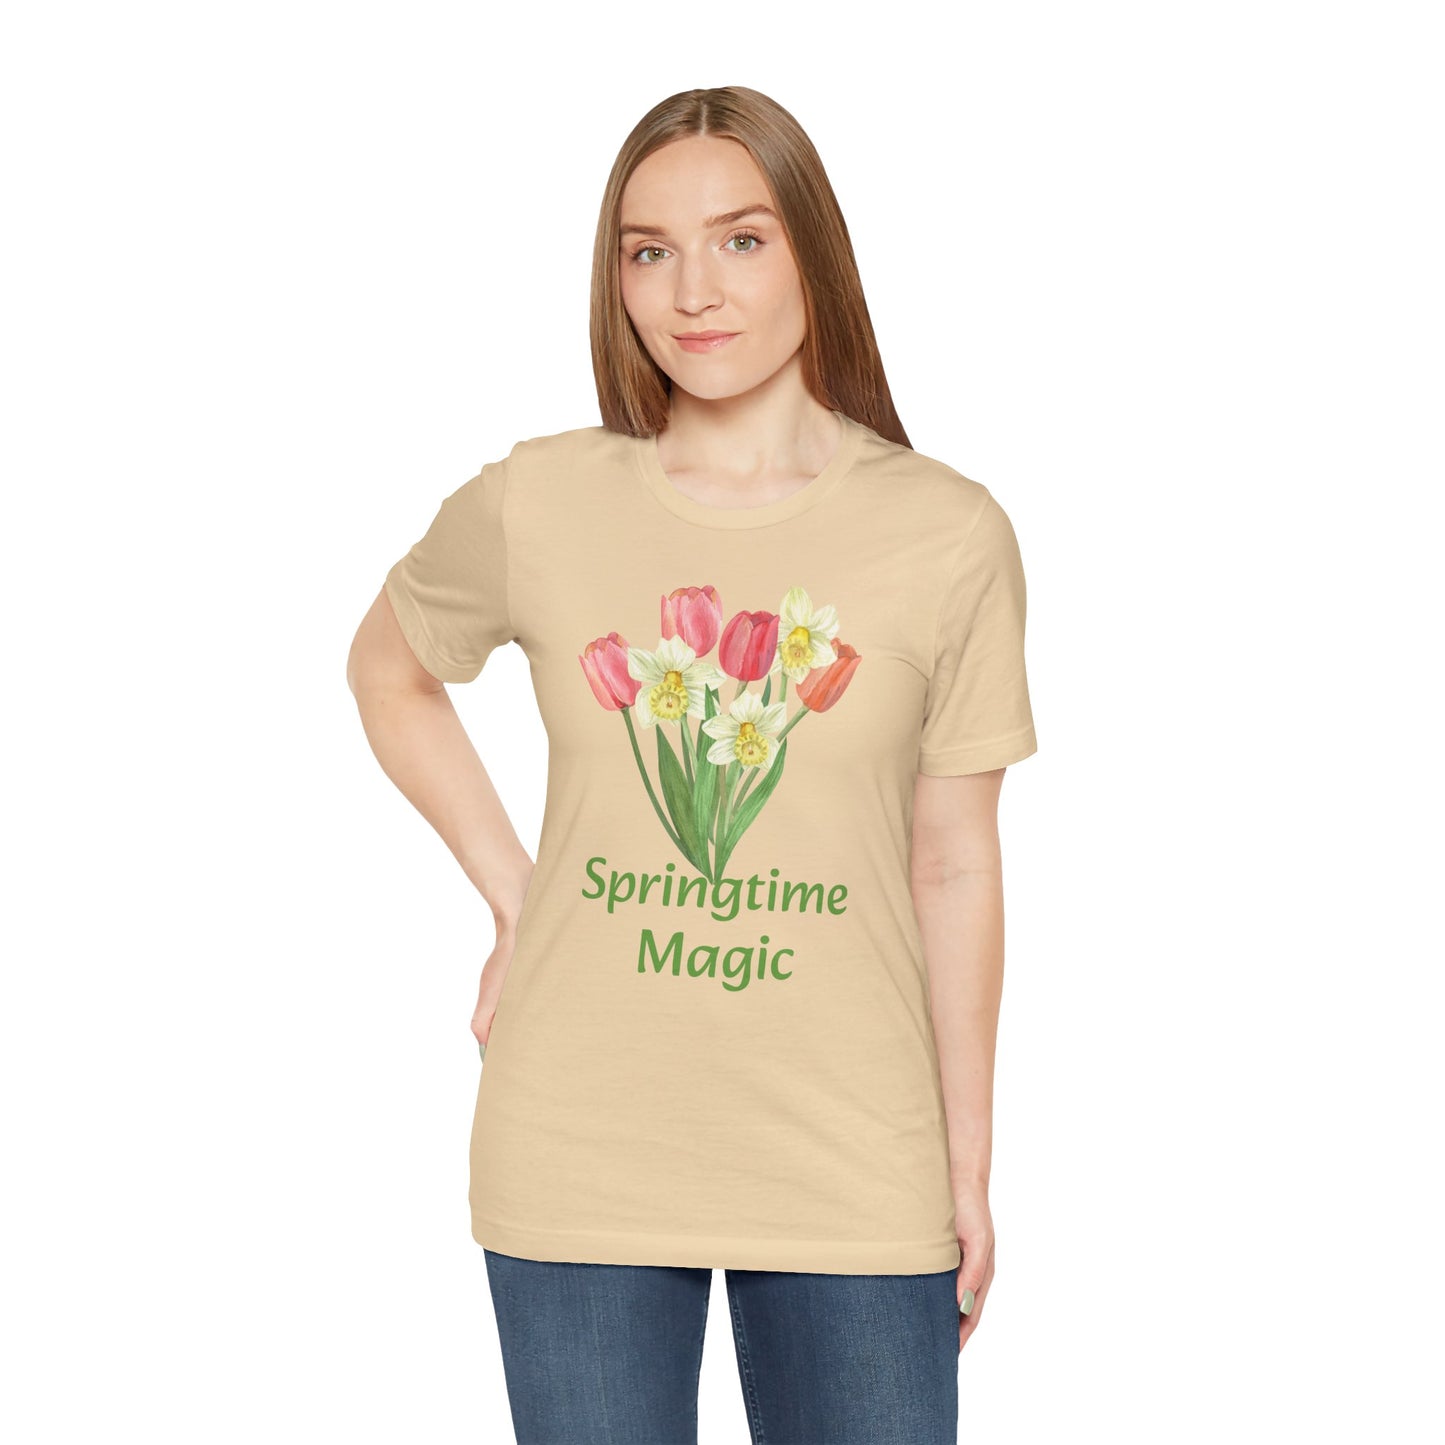 Woman wearing a beige cotton Unisex Springtime-Magic T-shirt with a tulip design and the text "springtime magic" from Bella + Canvas by Printify.